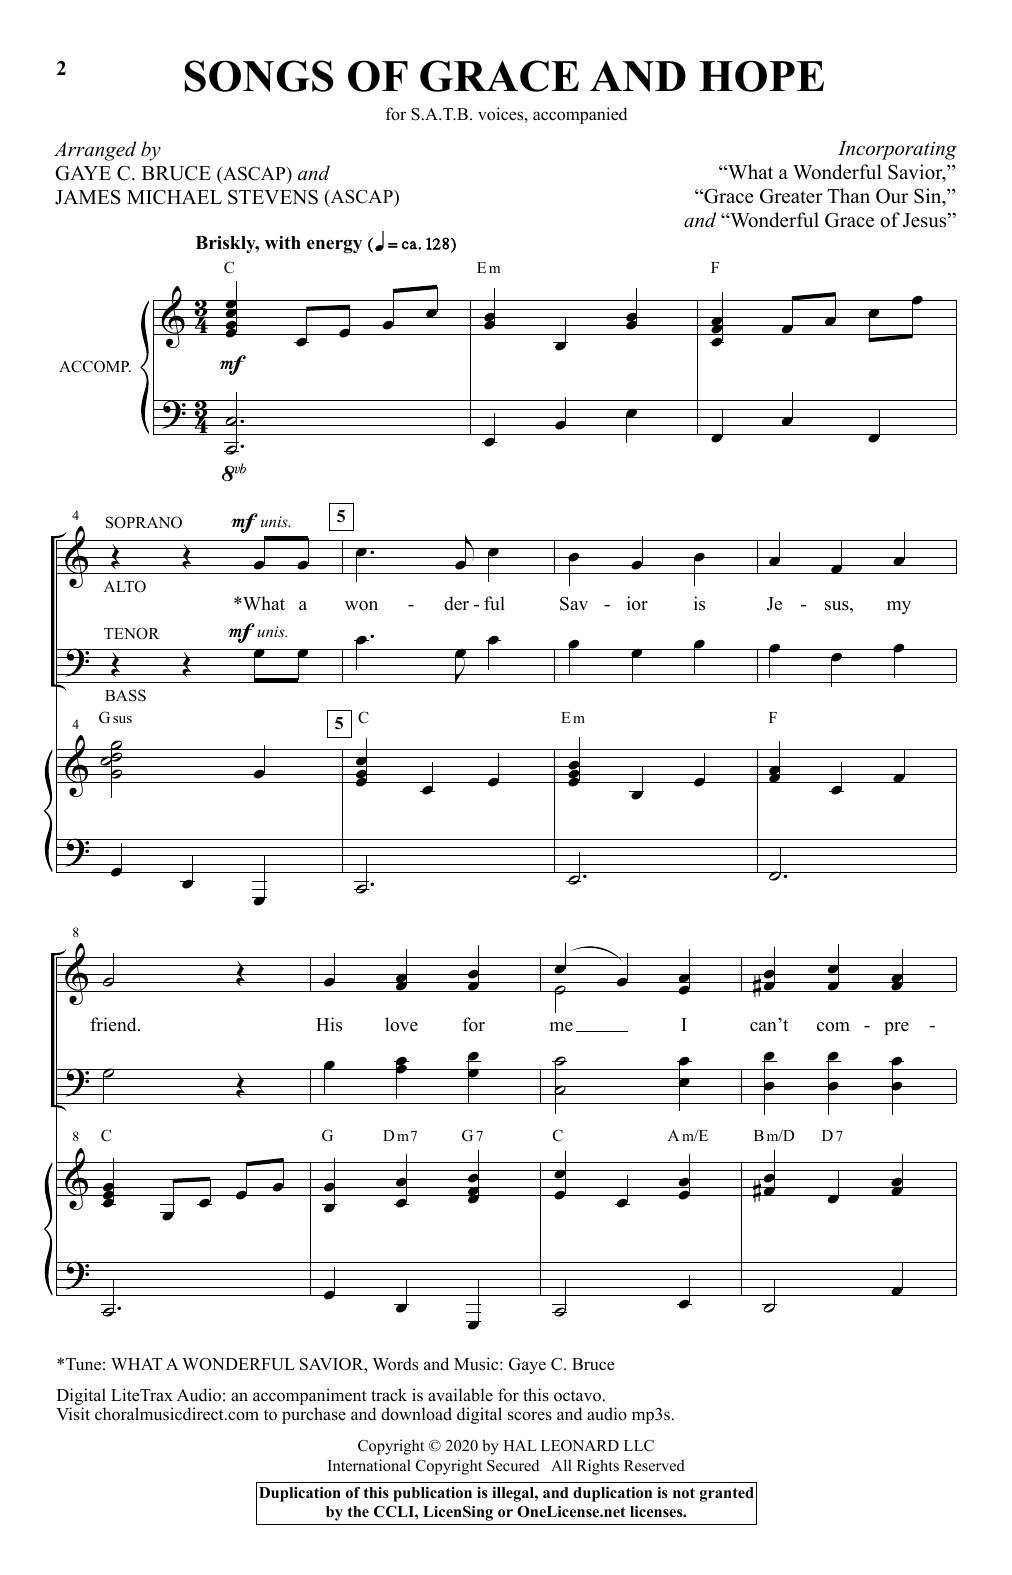 Download Gaye C. Bruce and James Michael Stev Songs of Grace and Hope Sheet Music